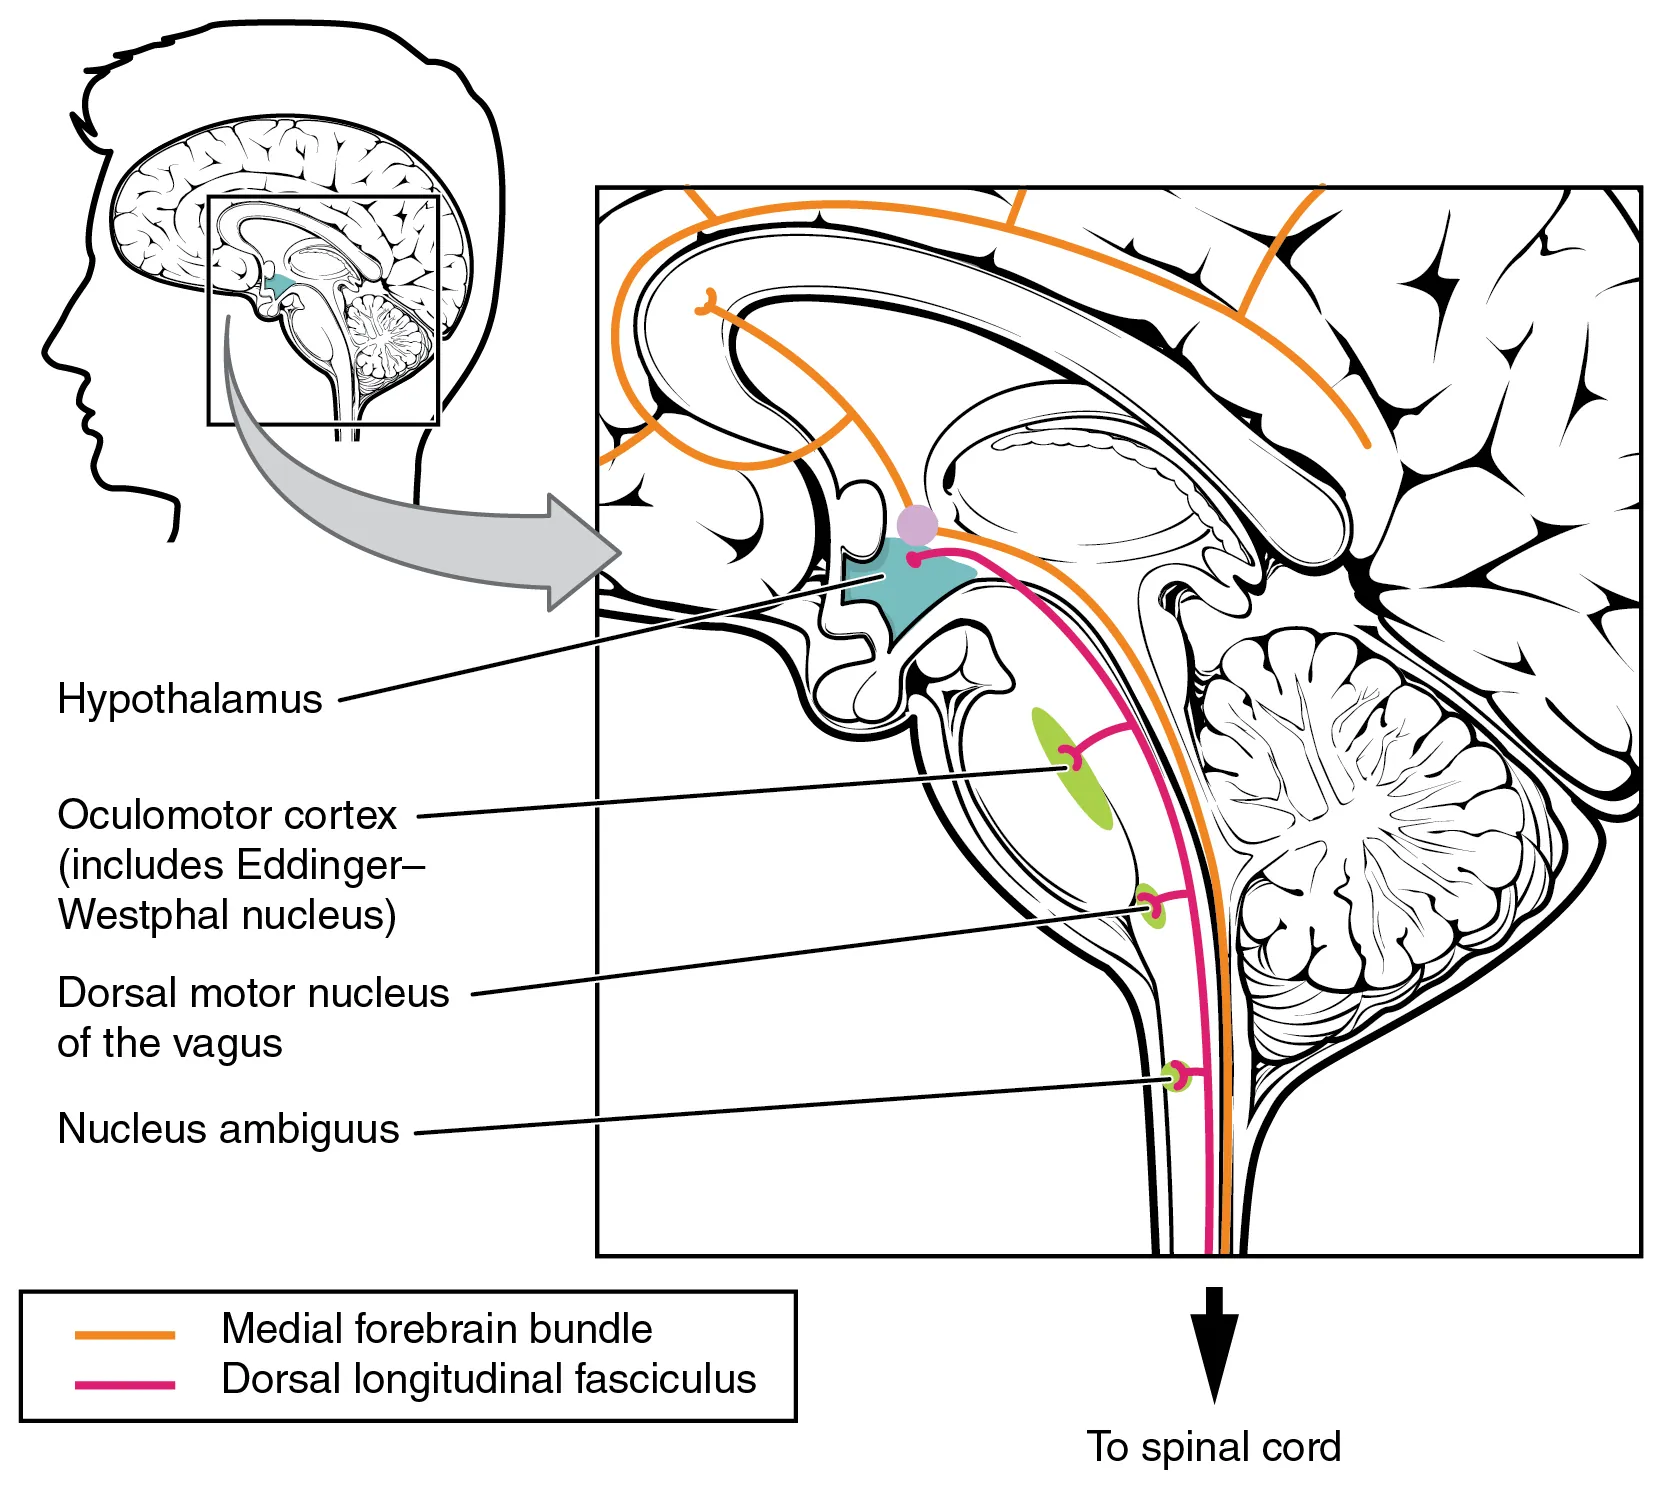 This figure shows the human brain on the left panel, and a magnified image shows the location of the medial forebrain bundle and the dorsal longitudinal fasciculus in the brain.